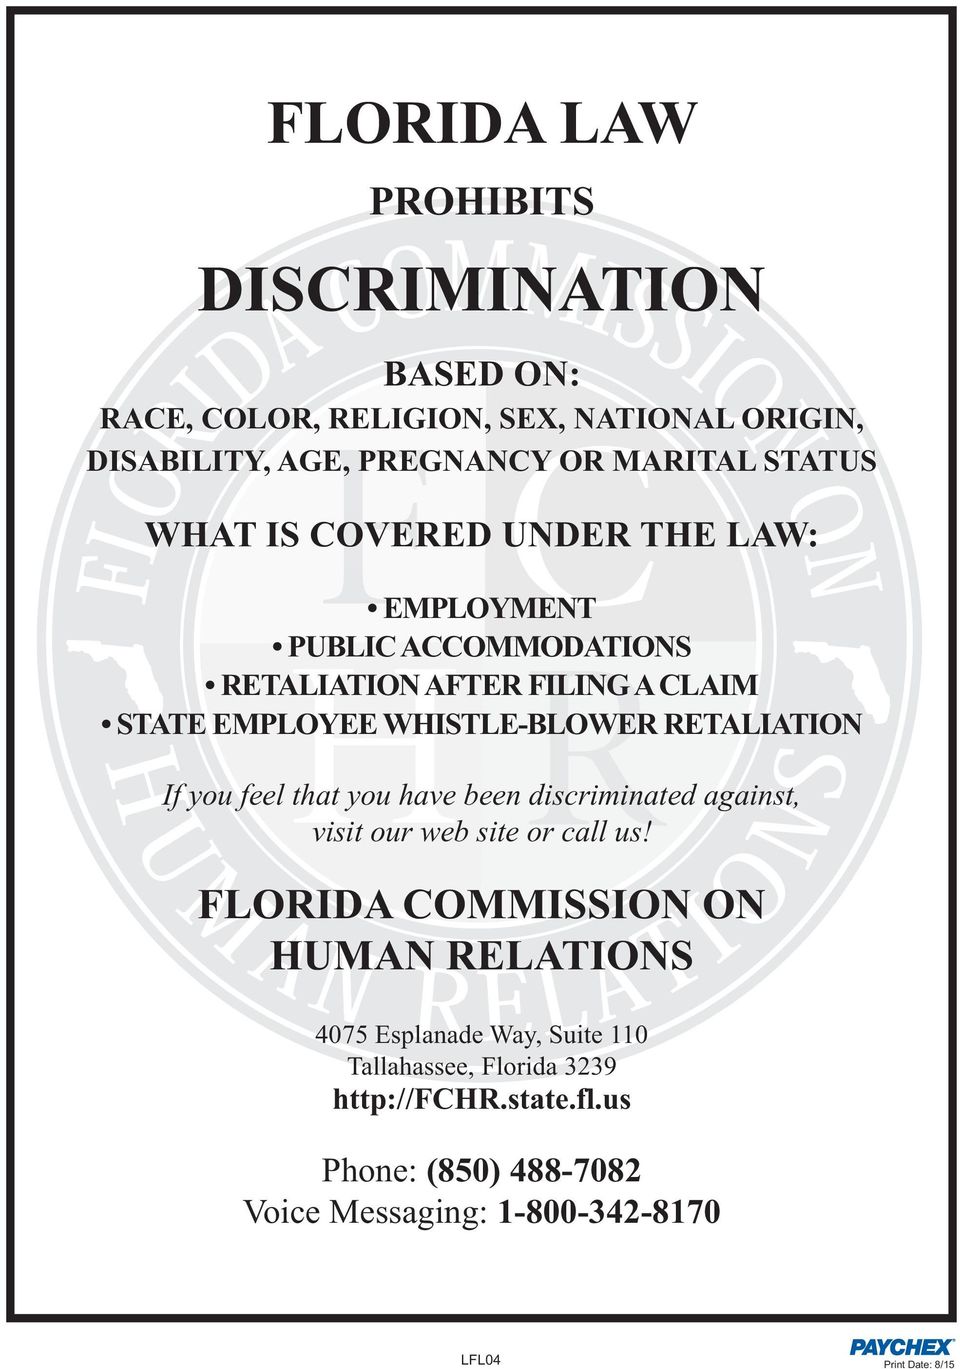 If you feel that you have been discriminated against, visit our web site or call us!